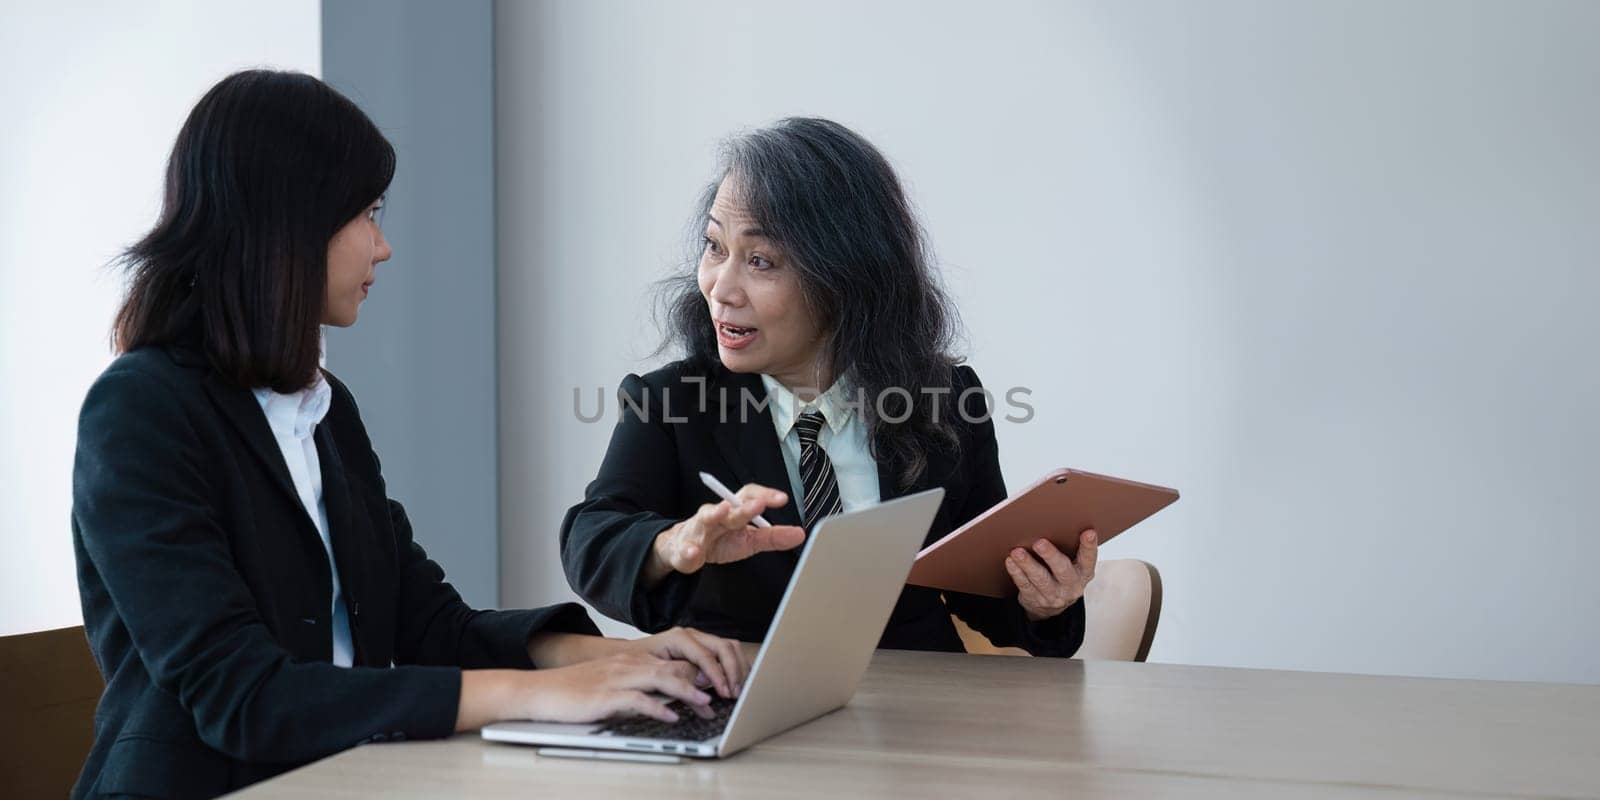 senior business professional woman talking to younger female colleague at office table, speaking, gesturing, teaching, explaining work tasks by itchaznong